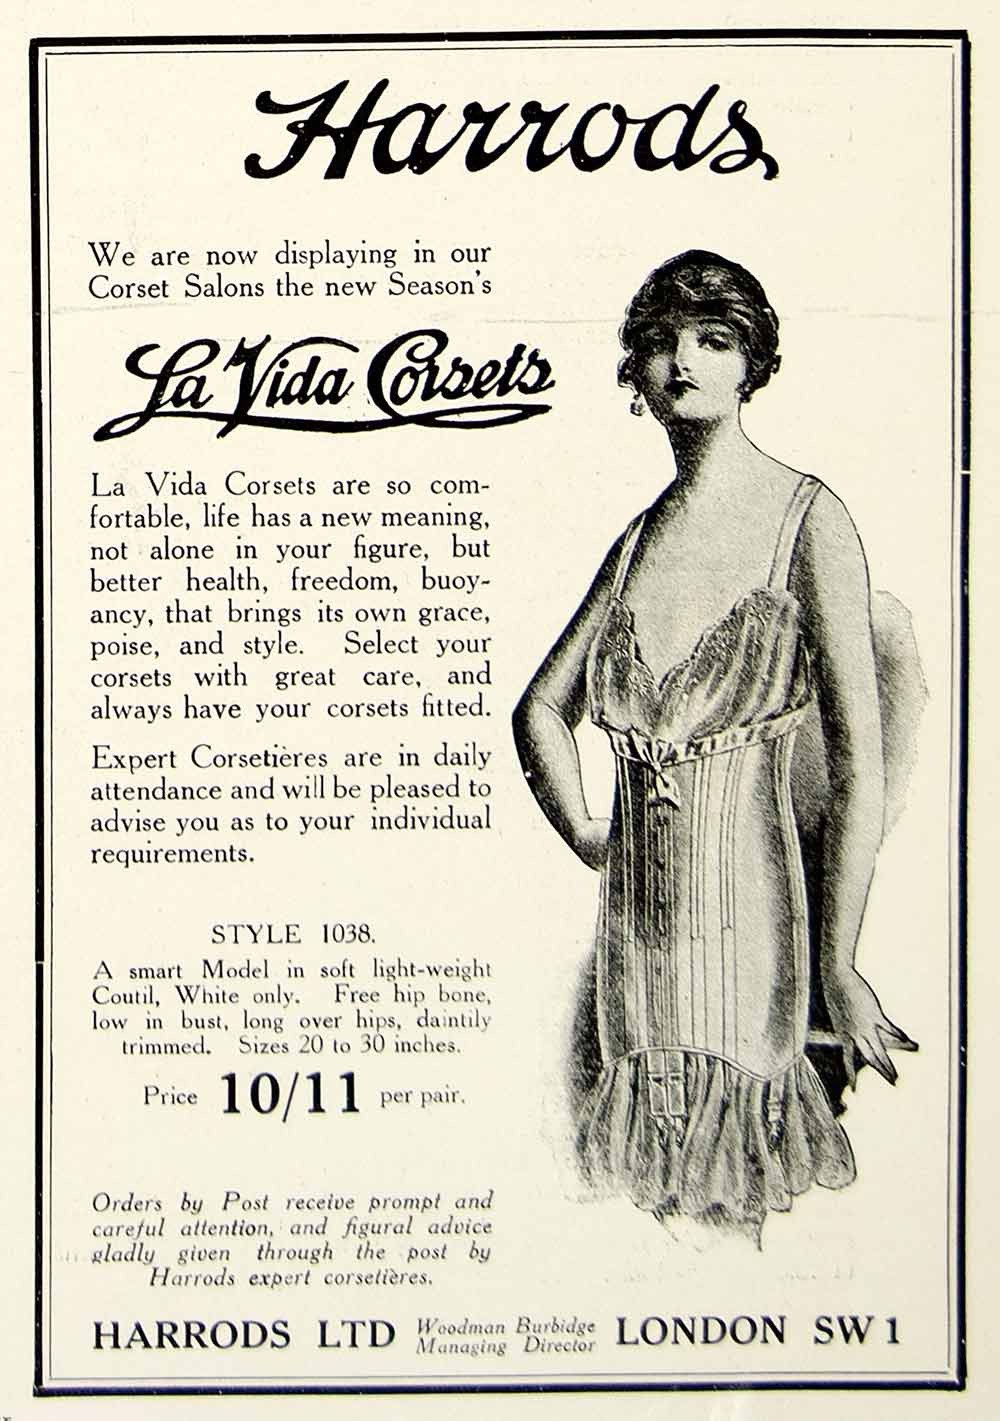 1914 Vintage Ad Weight Loss Rubber Garments Bust Size - ORIGINAL